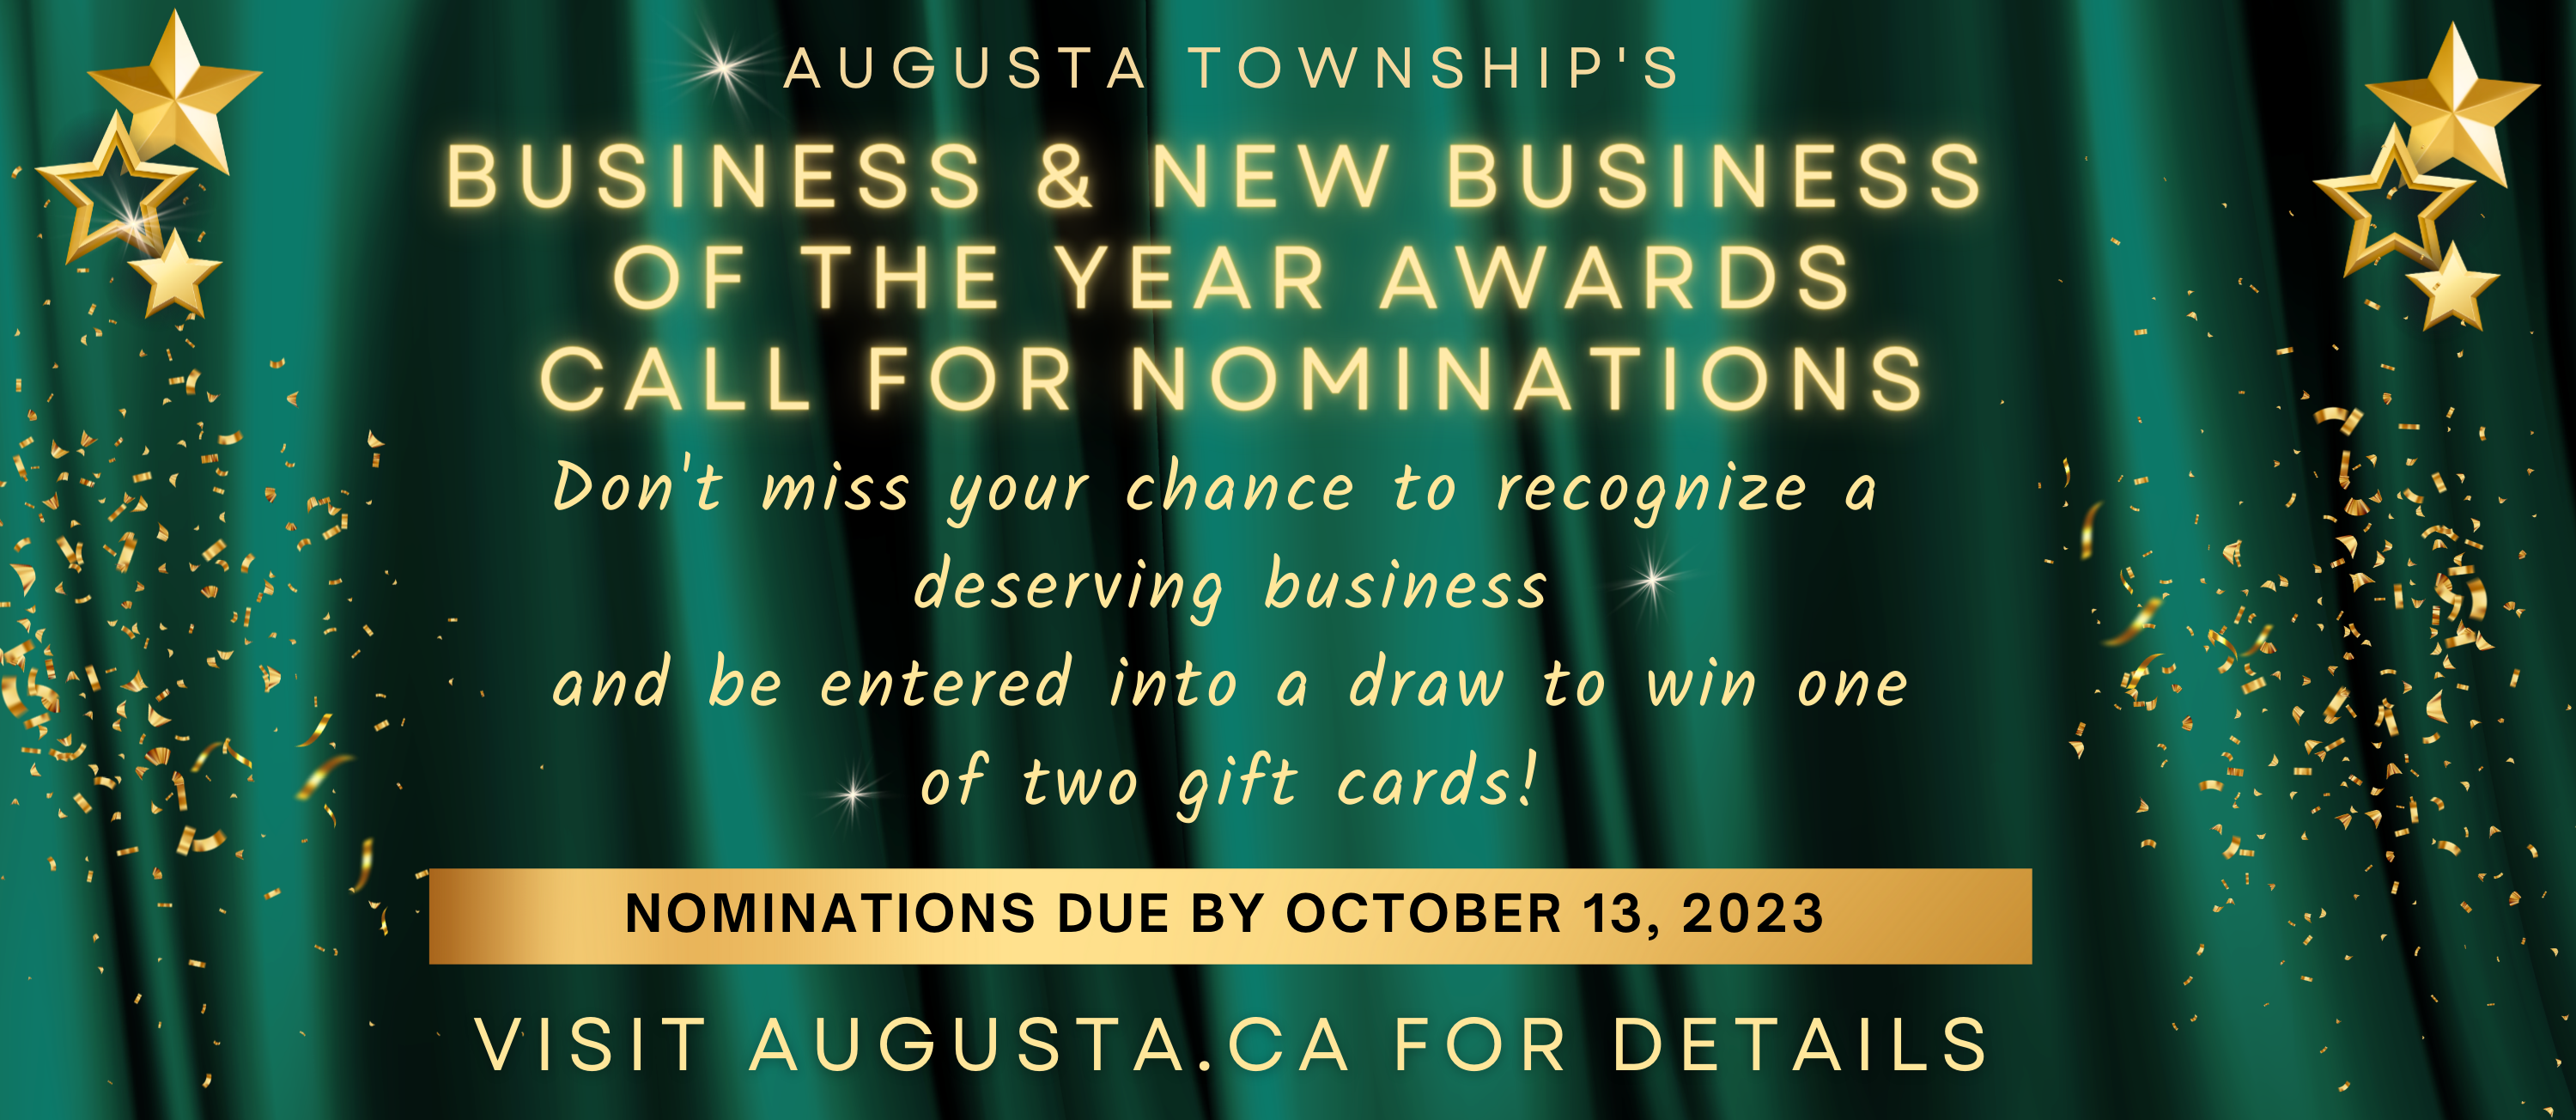 green curtain with gold confetti and stars. states augusta township's business & new business of the year awards call for nominations.